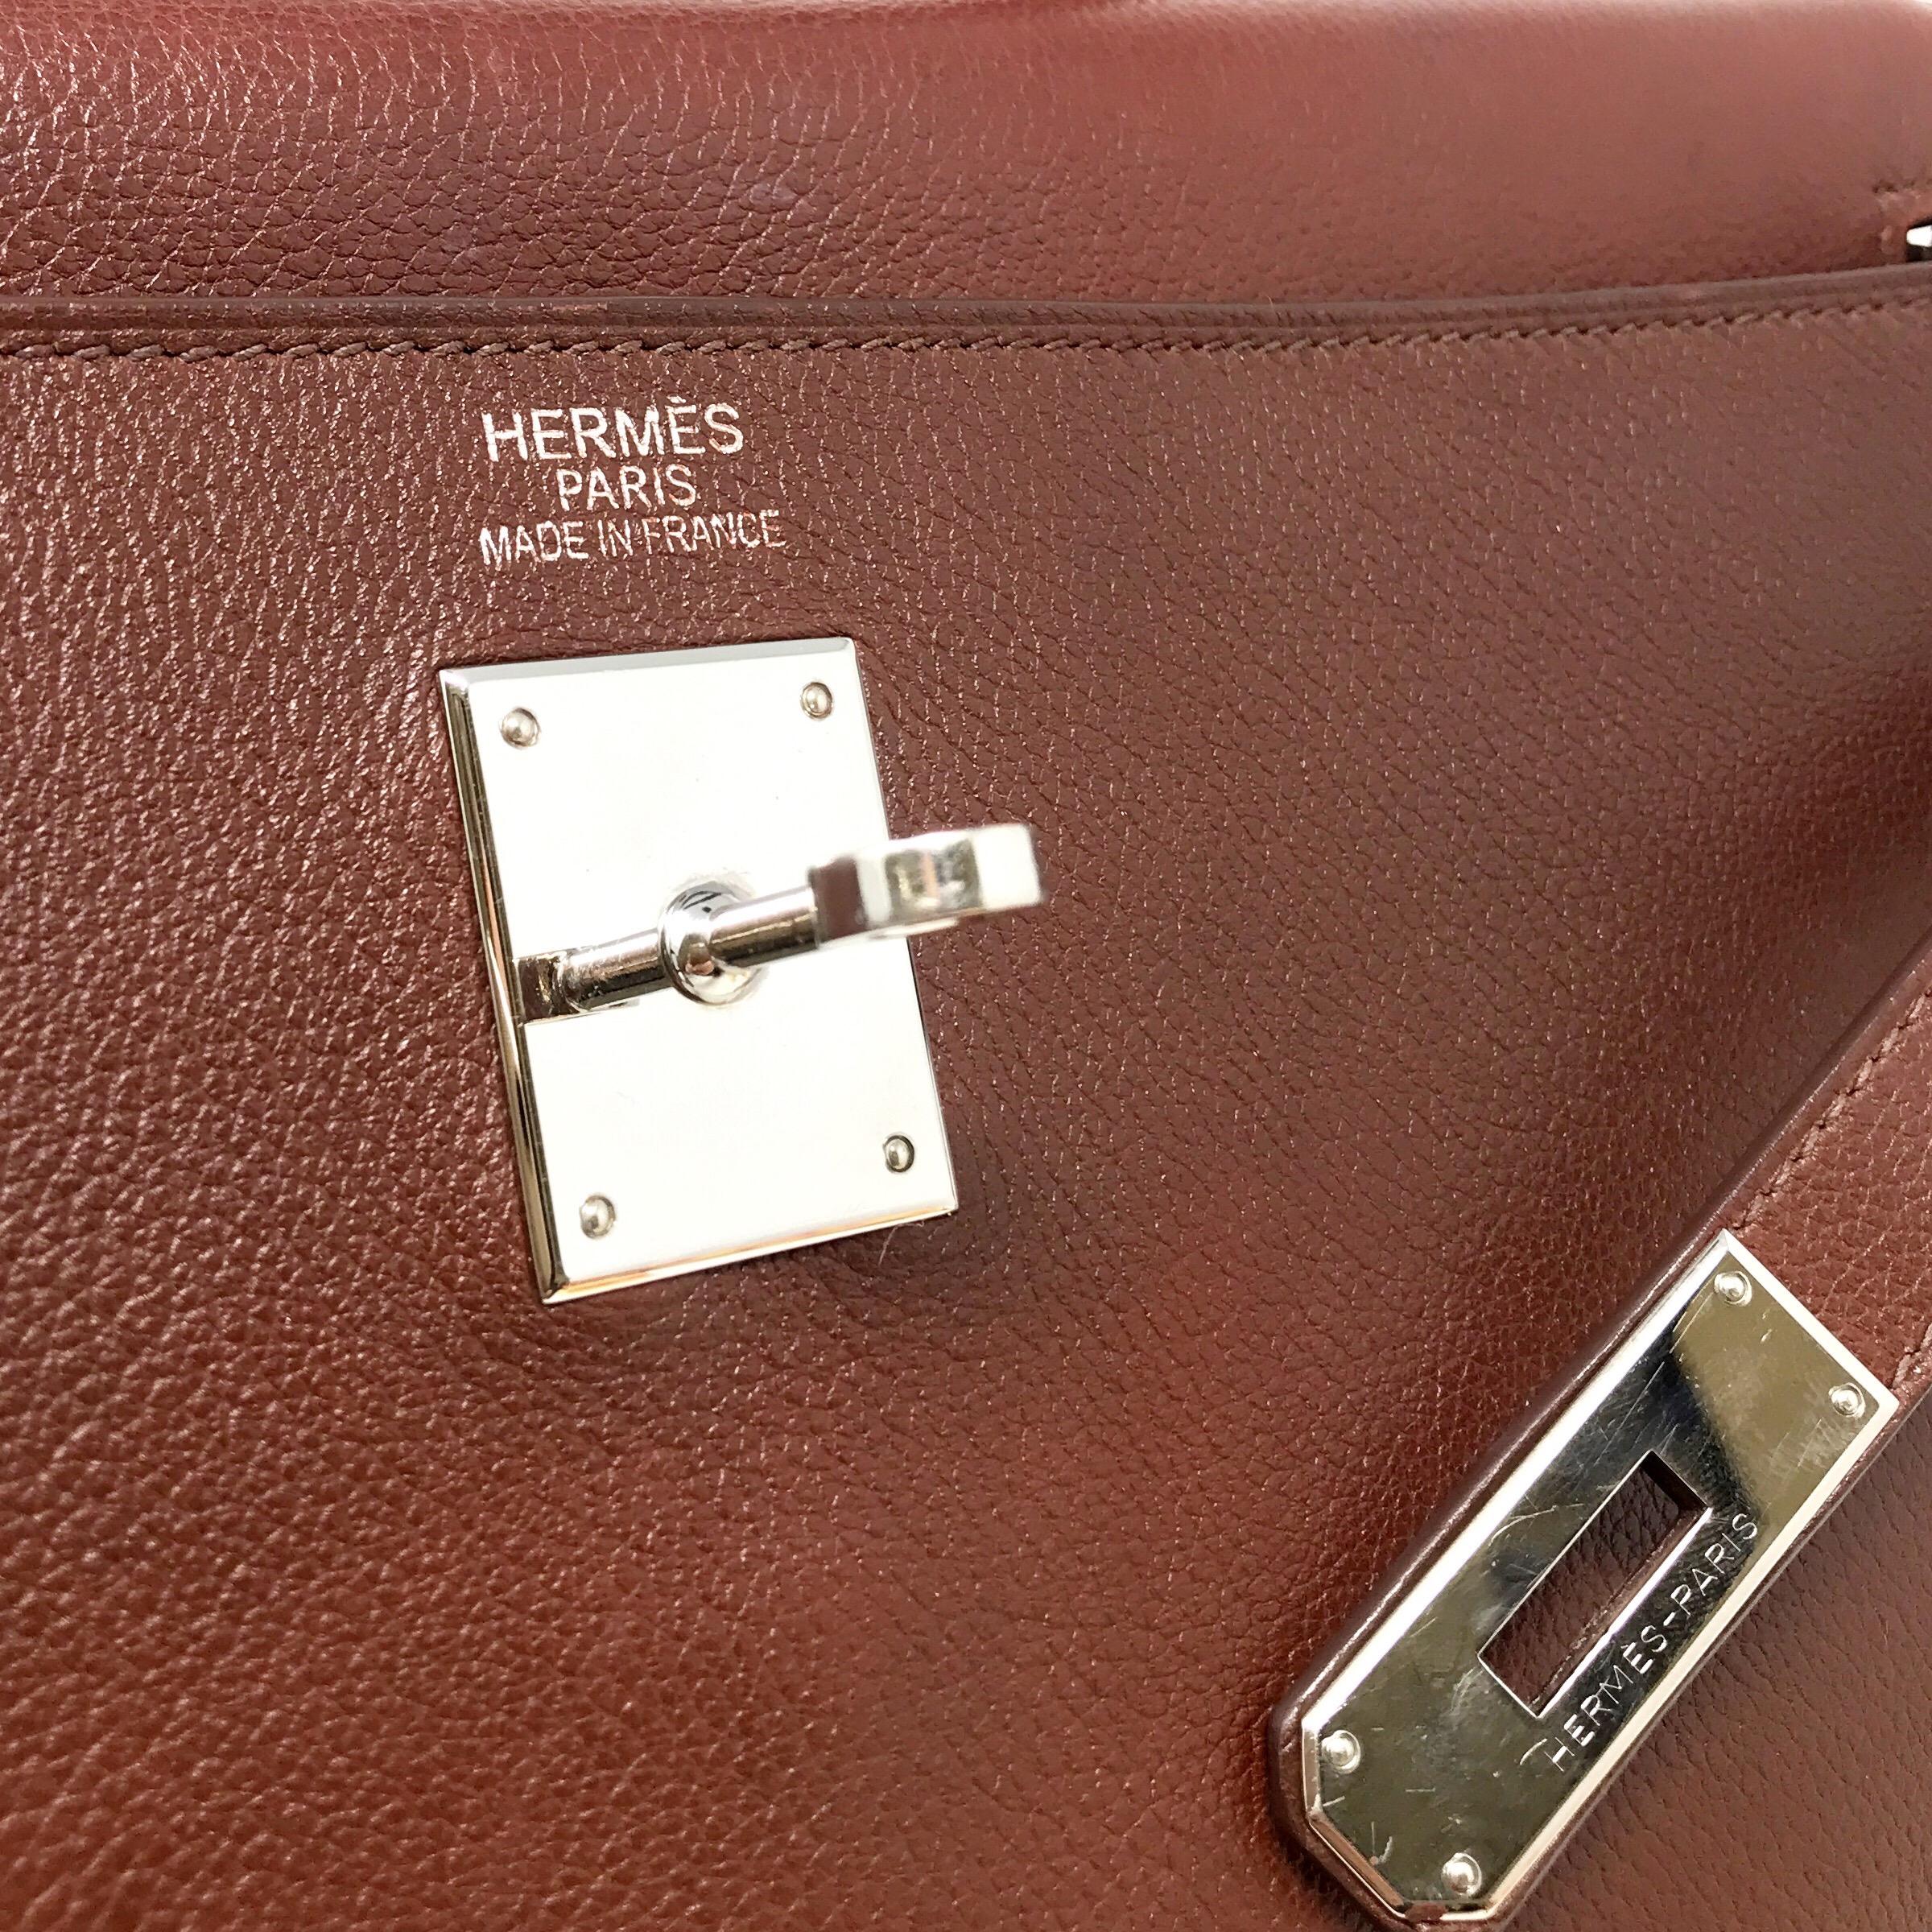 HERMES PARIS Sac KELLY Retourne, This fabulous Made from Hermes signature box leather in a deep brown color, this bag is lined in caramel colored goatskin and features brown stitching. Very Good Condition medium size 35, strap included. hdw silver.